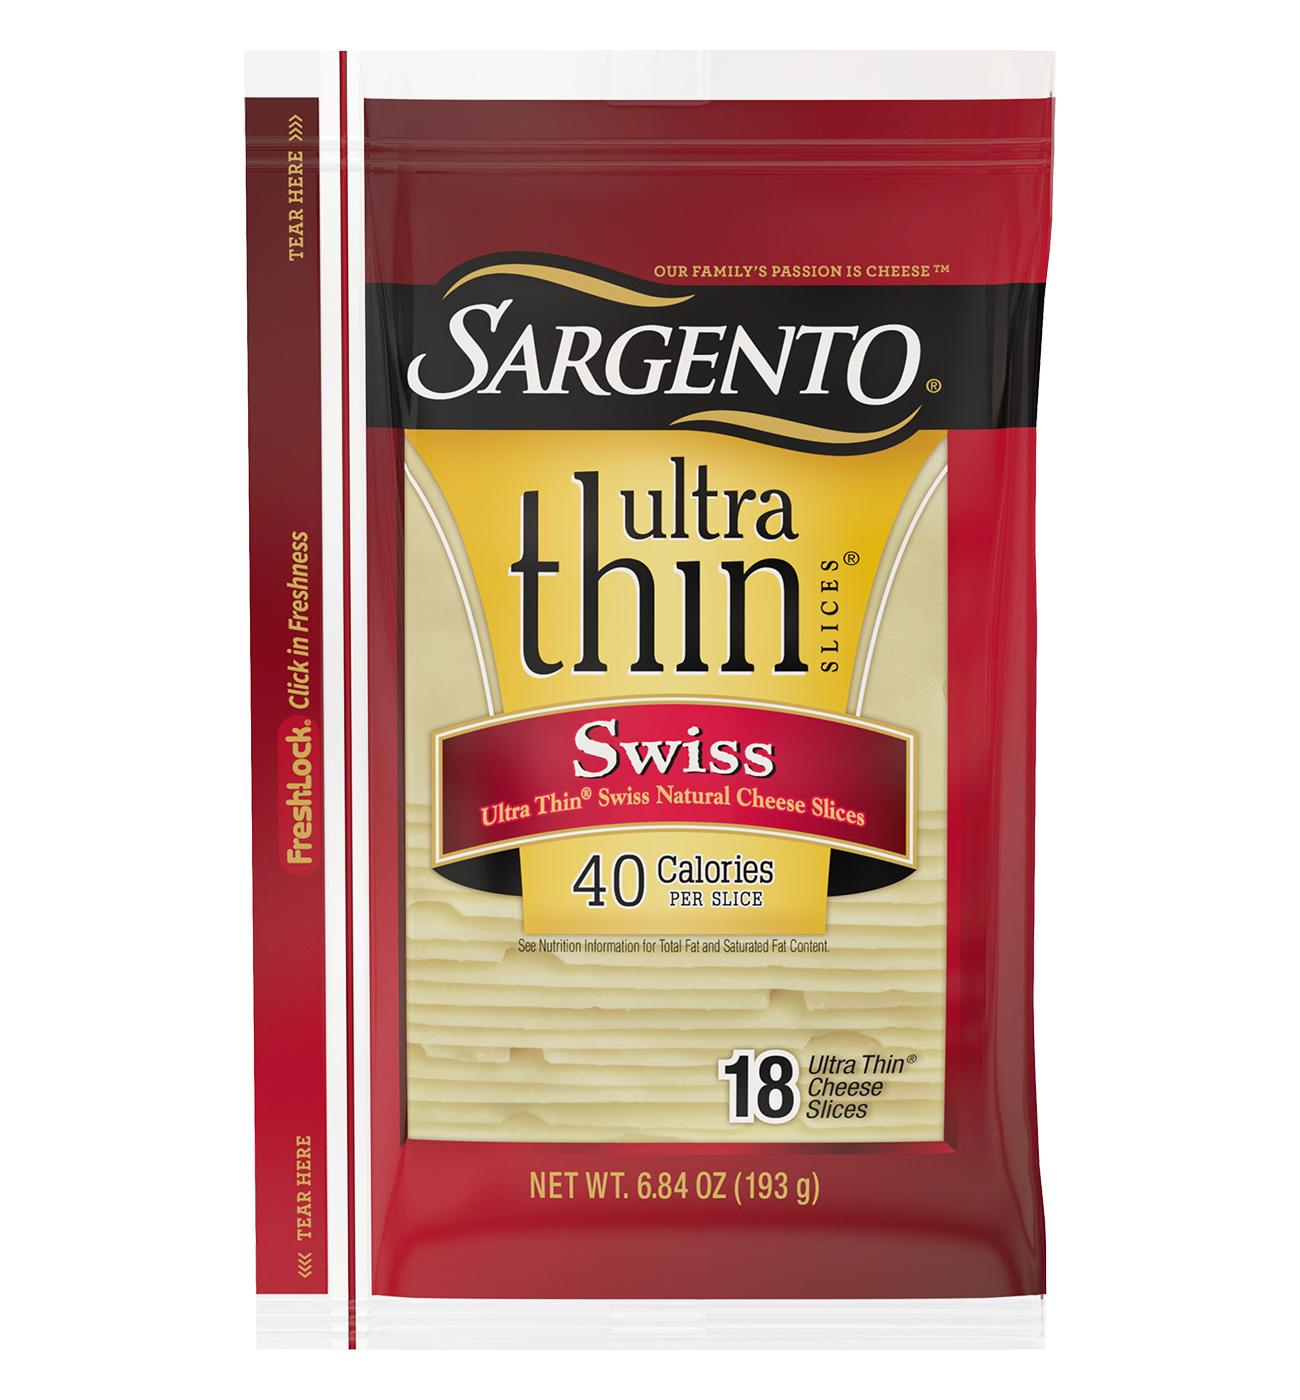 SARGENTO Swiss Ultra Thin Sliced Cheese; image 1 of 2